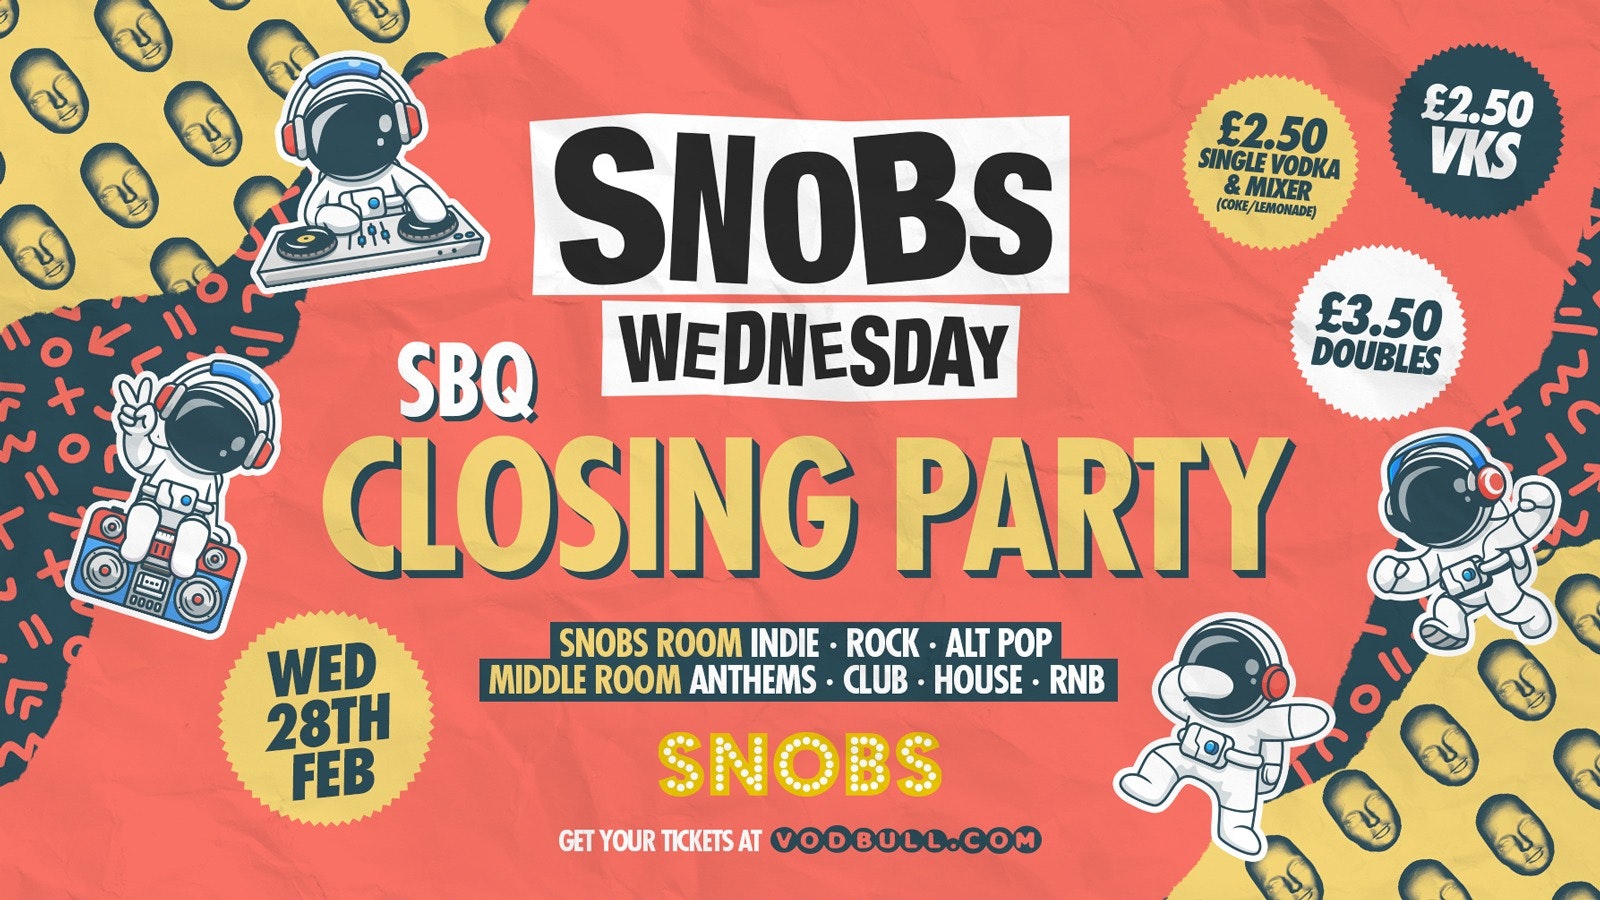 Snobs Wednesday 🔥NOW ON SALE🔥🚨THE WEDS CLOSING PARTY🚨 28th Feb